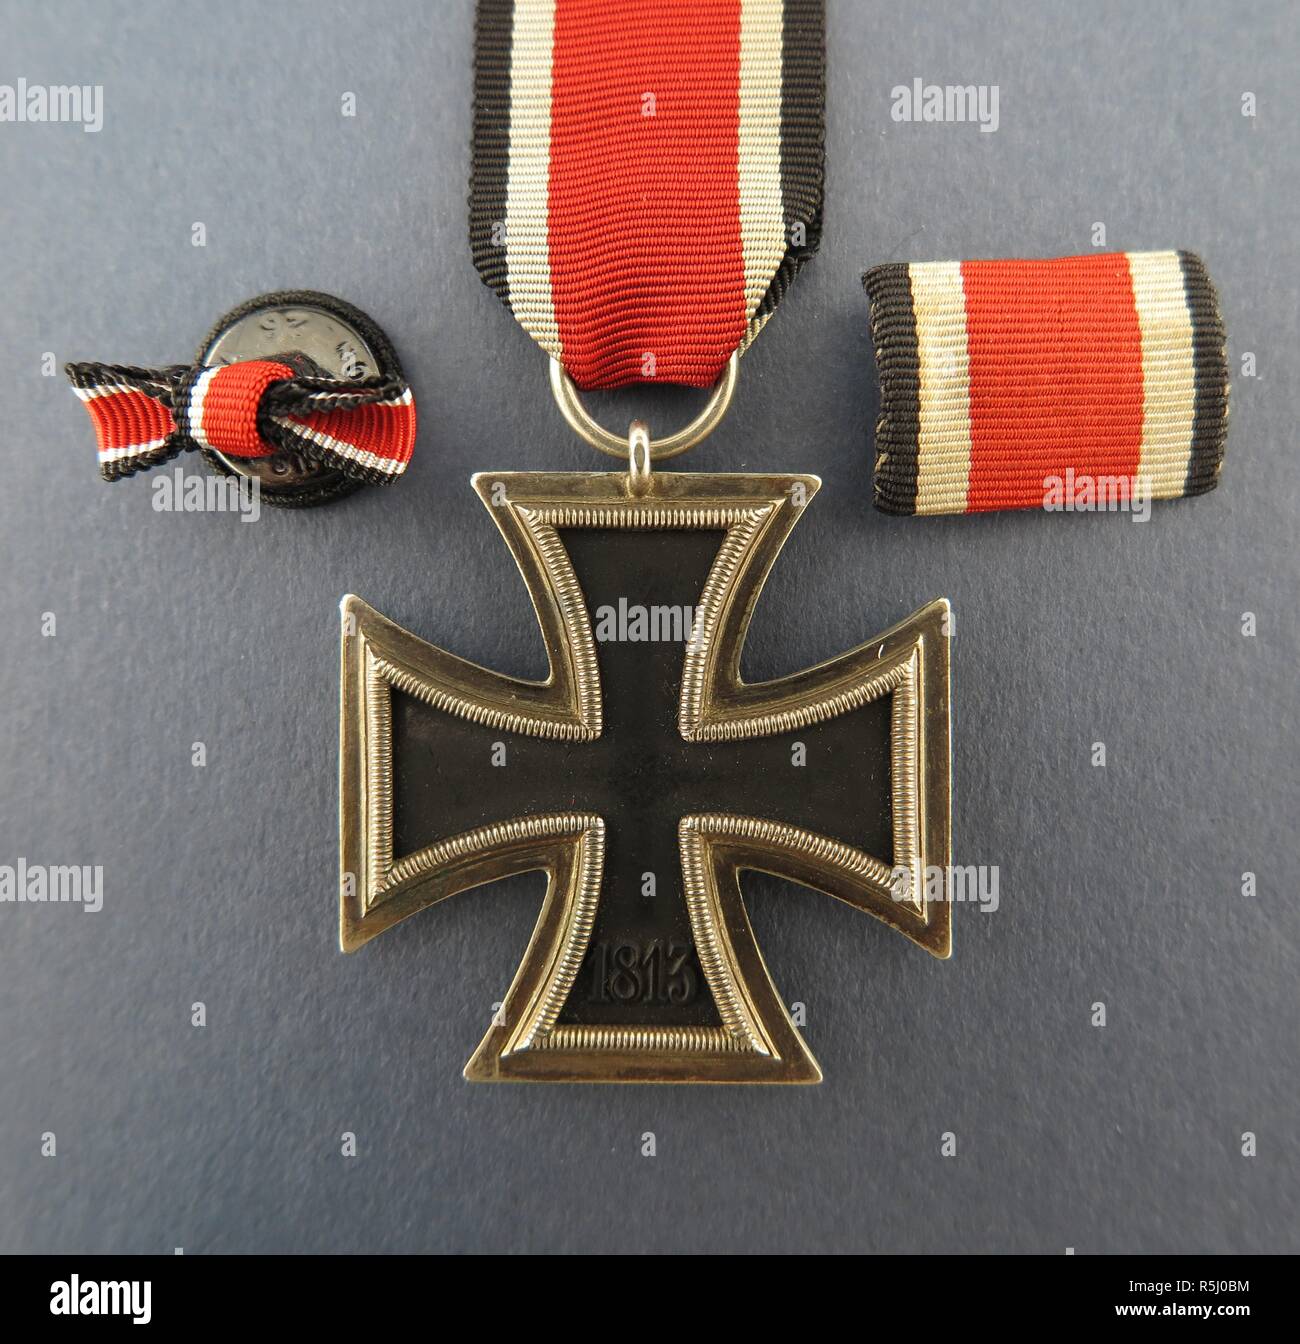 Iron Cross 2nd Class with Ribbon and Button. Museum: PRIVATE COLLECTION. Author: Orders, decorations and medals. Stock Photo